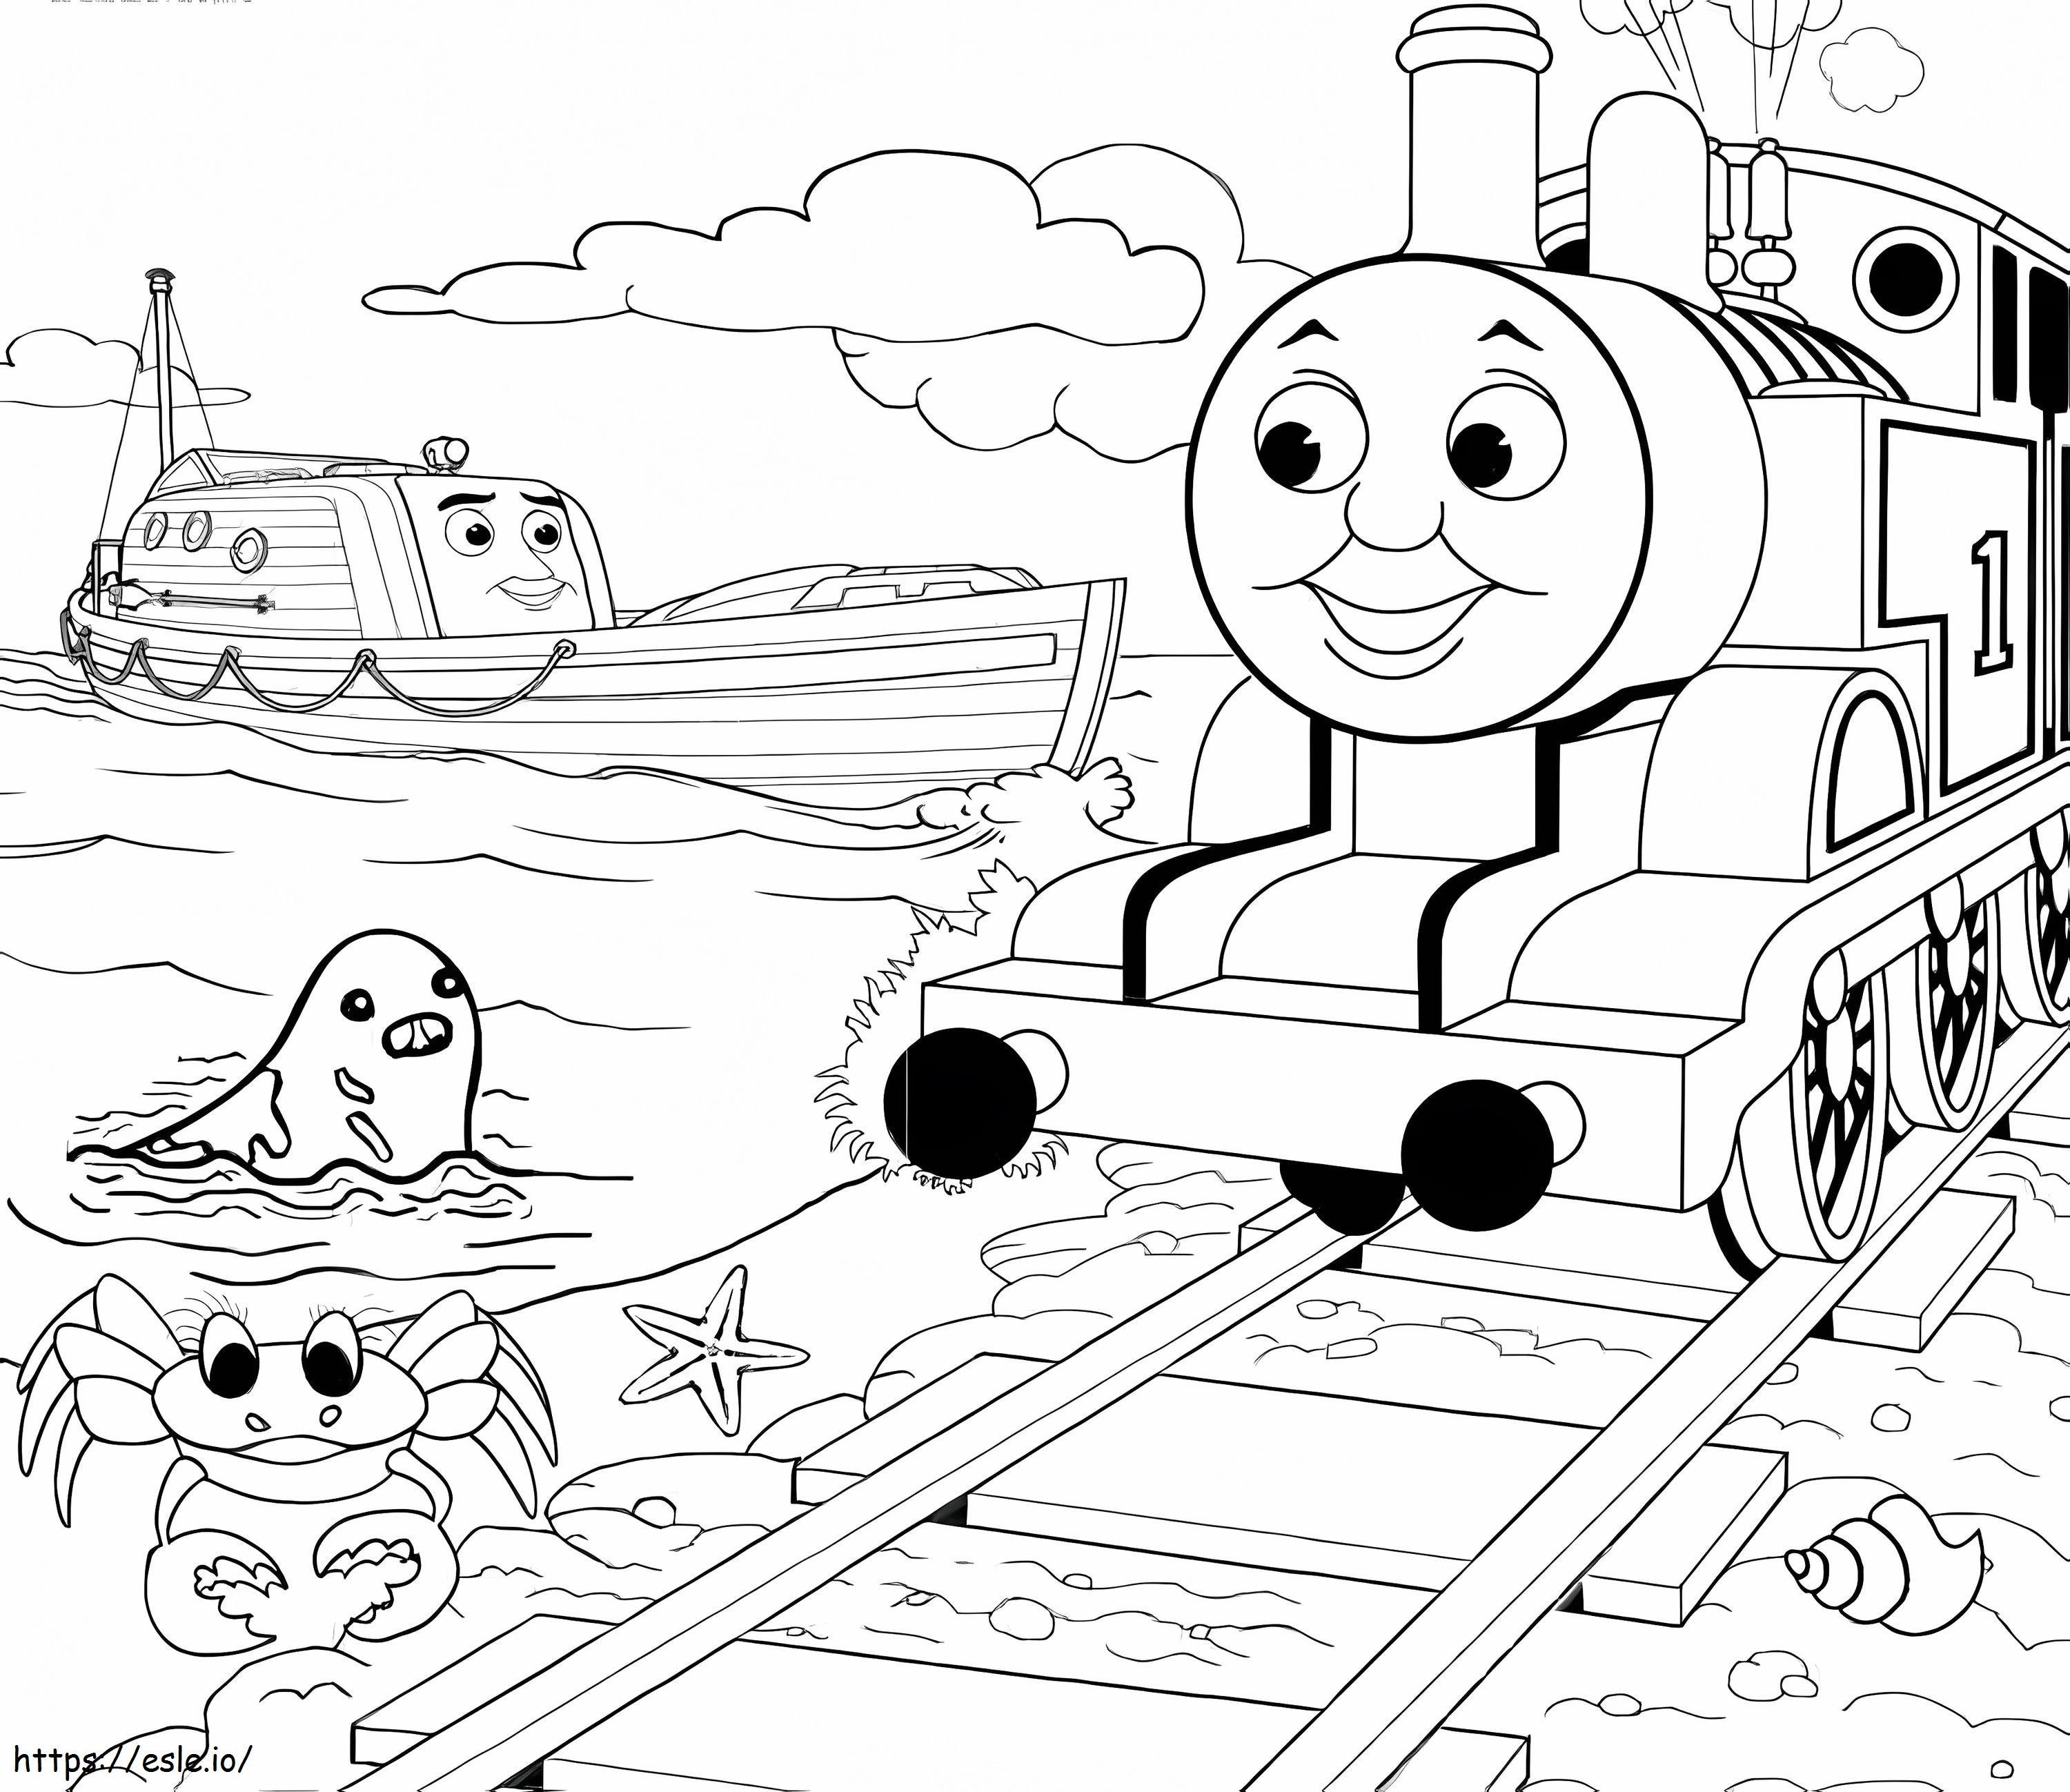 Thomas The Train And The Animals coloring page